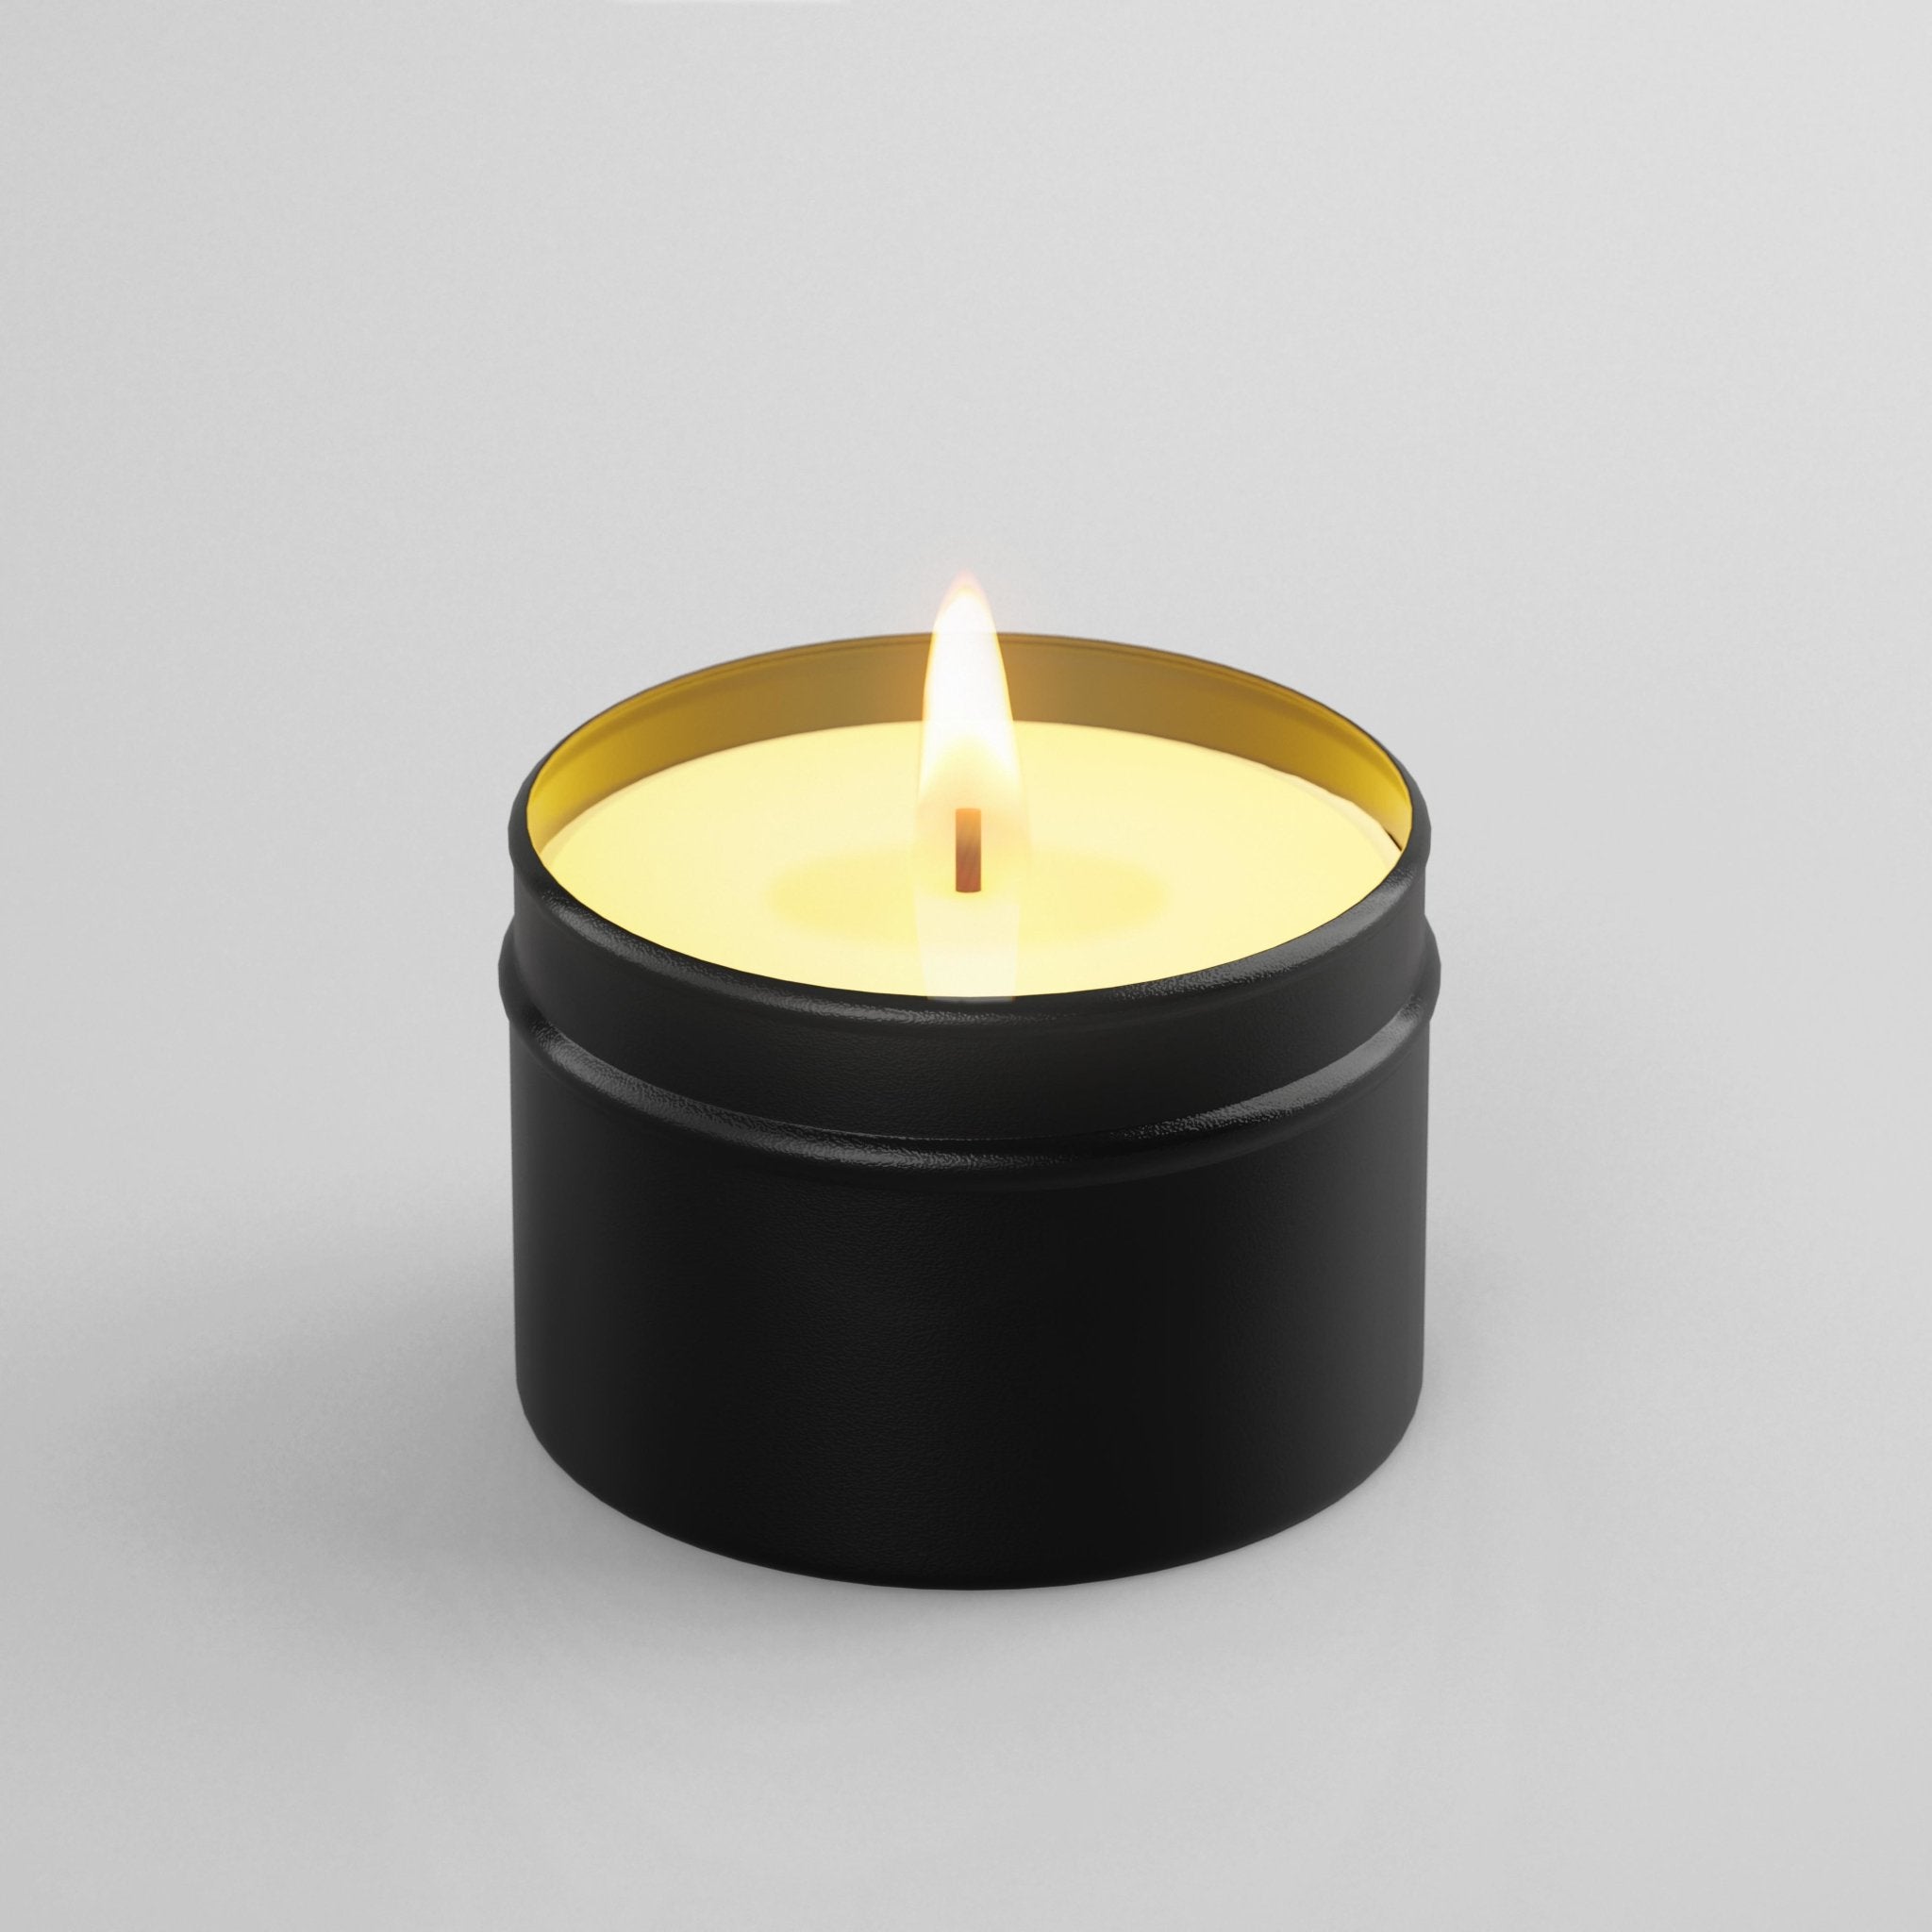 French Botanicals Natural Wax Scented Candle in Black Travel Tin - Candlefy